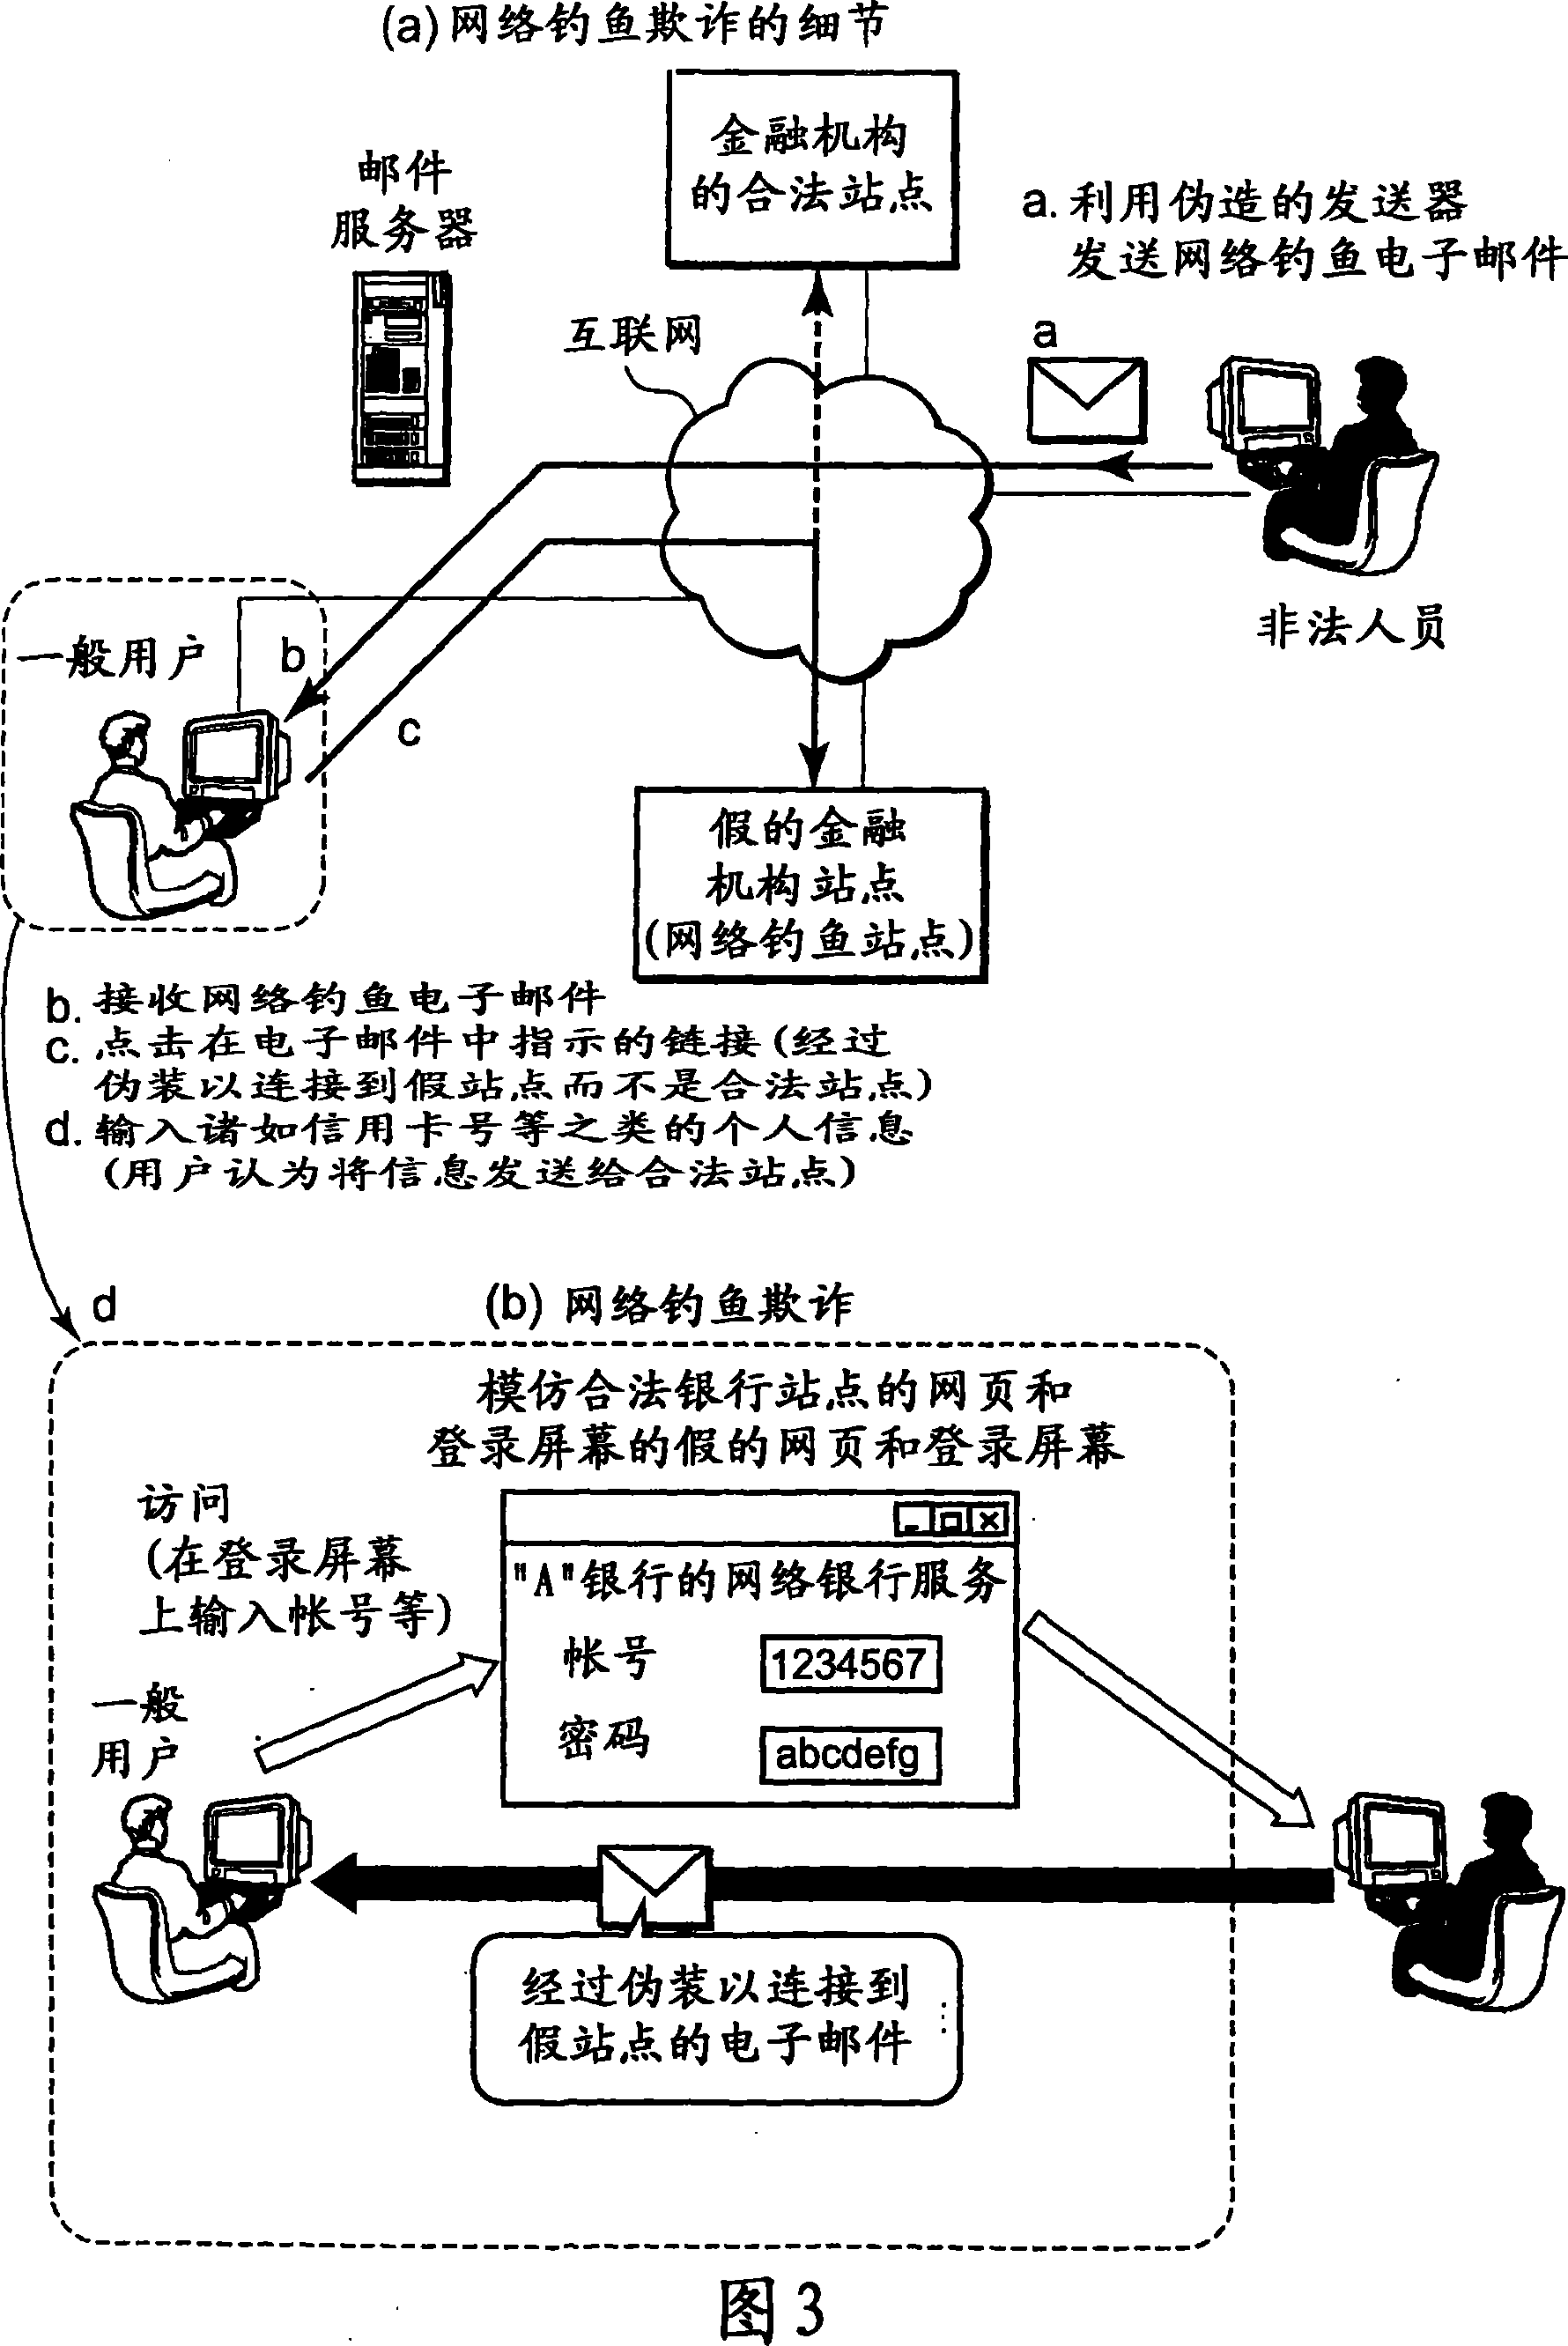 Electronic authentication method and electronic authentication system